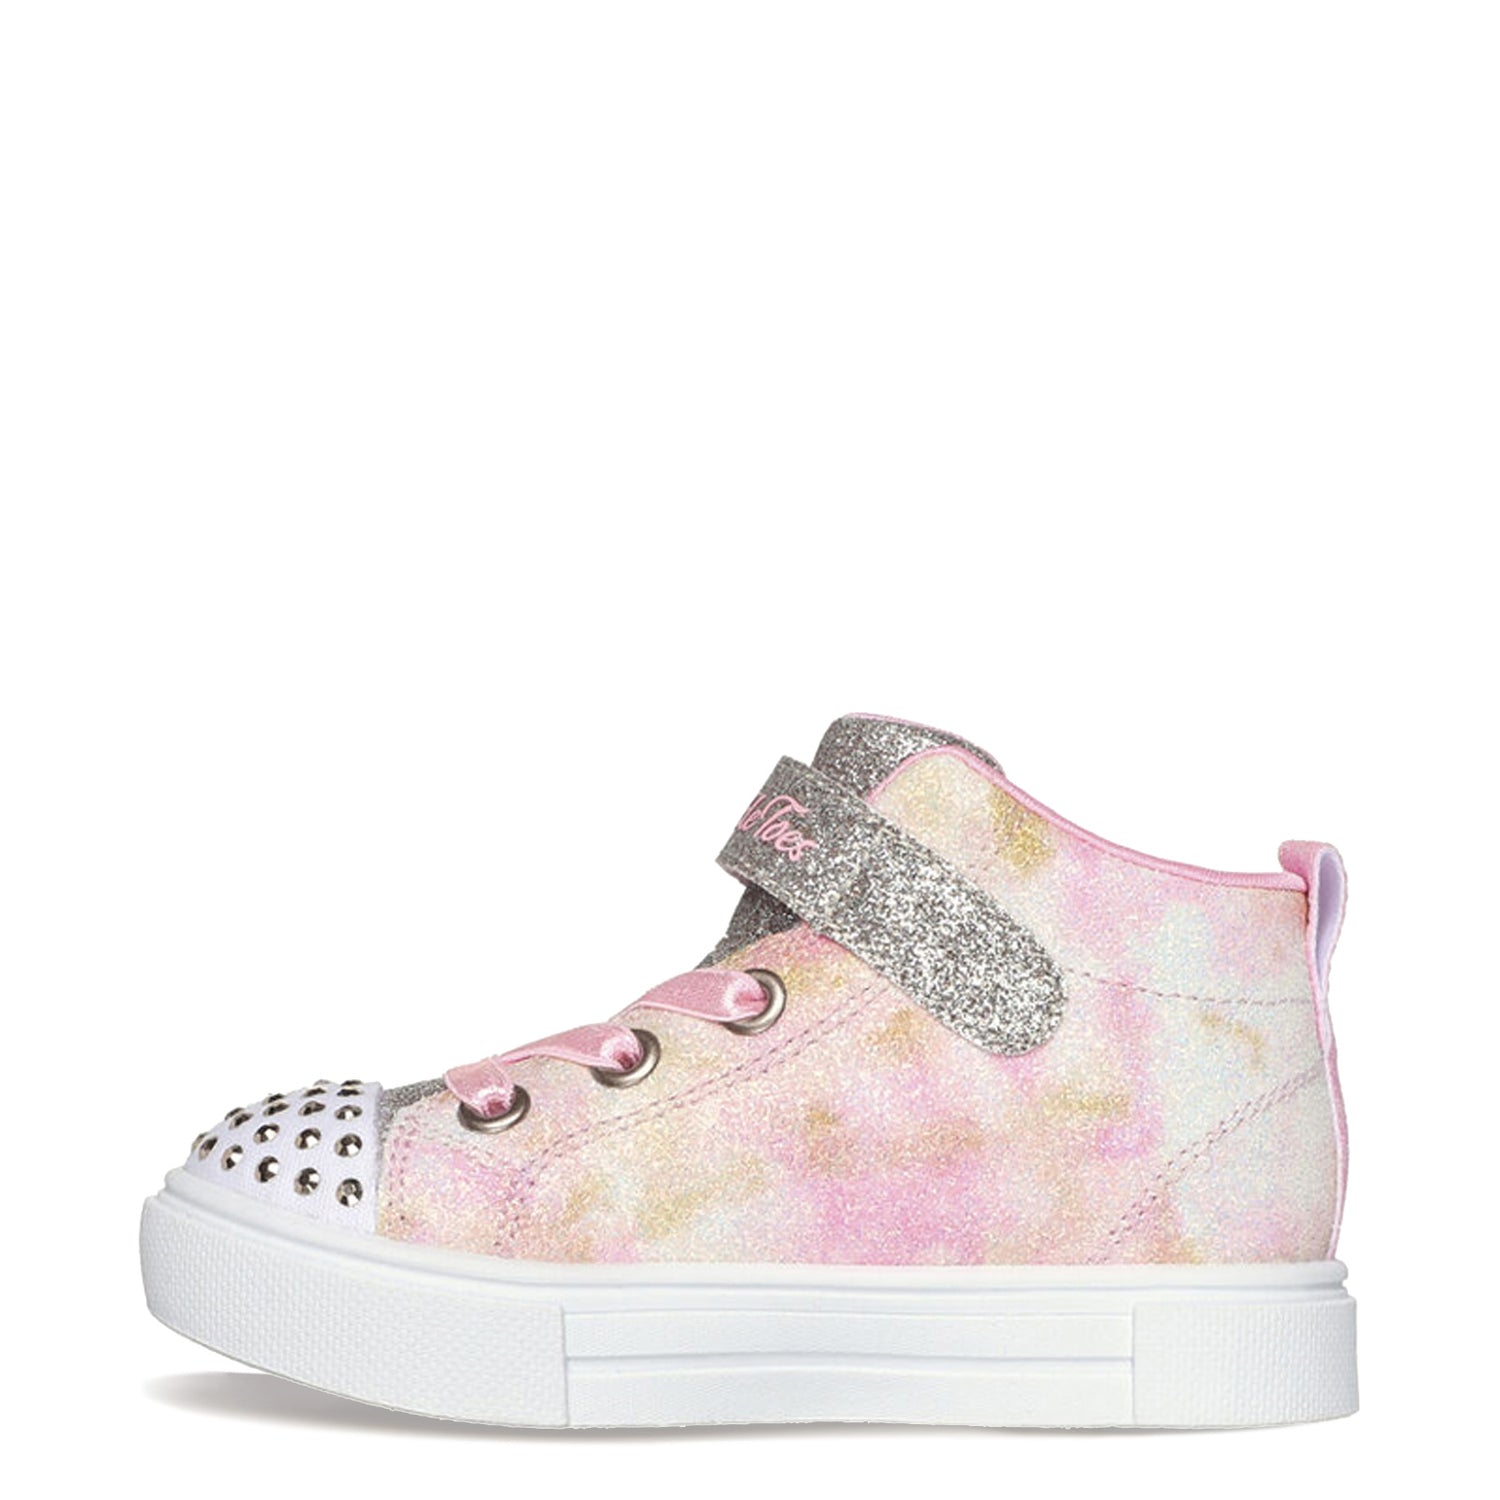 Peltz Shoes  Girl's Skechers Twinkle Toes: Twinkle Sparks - Ombre Dazzle Sneaker - Toddler Ombre Gold Multi 314804N-GDMT